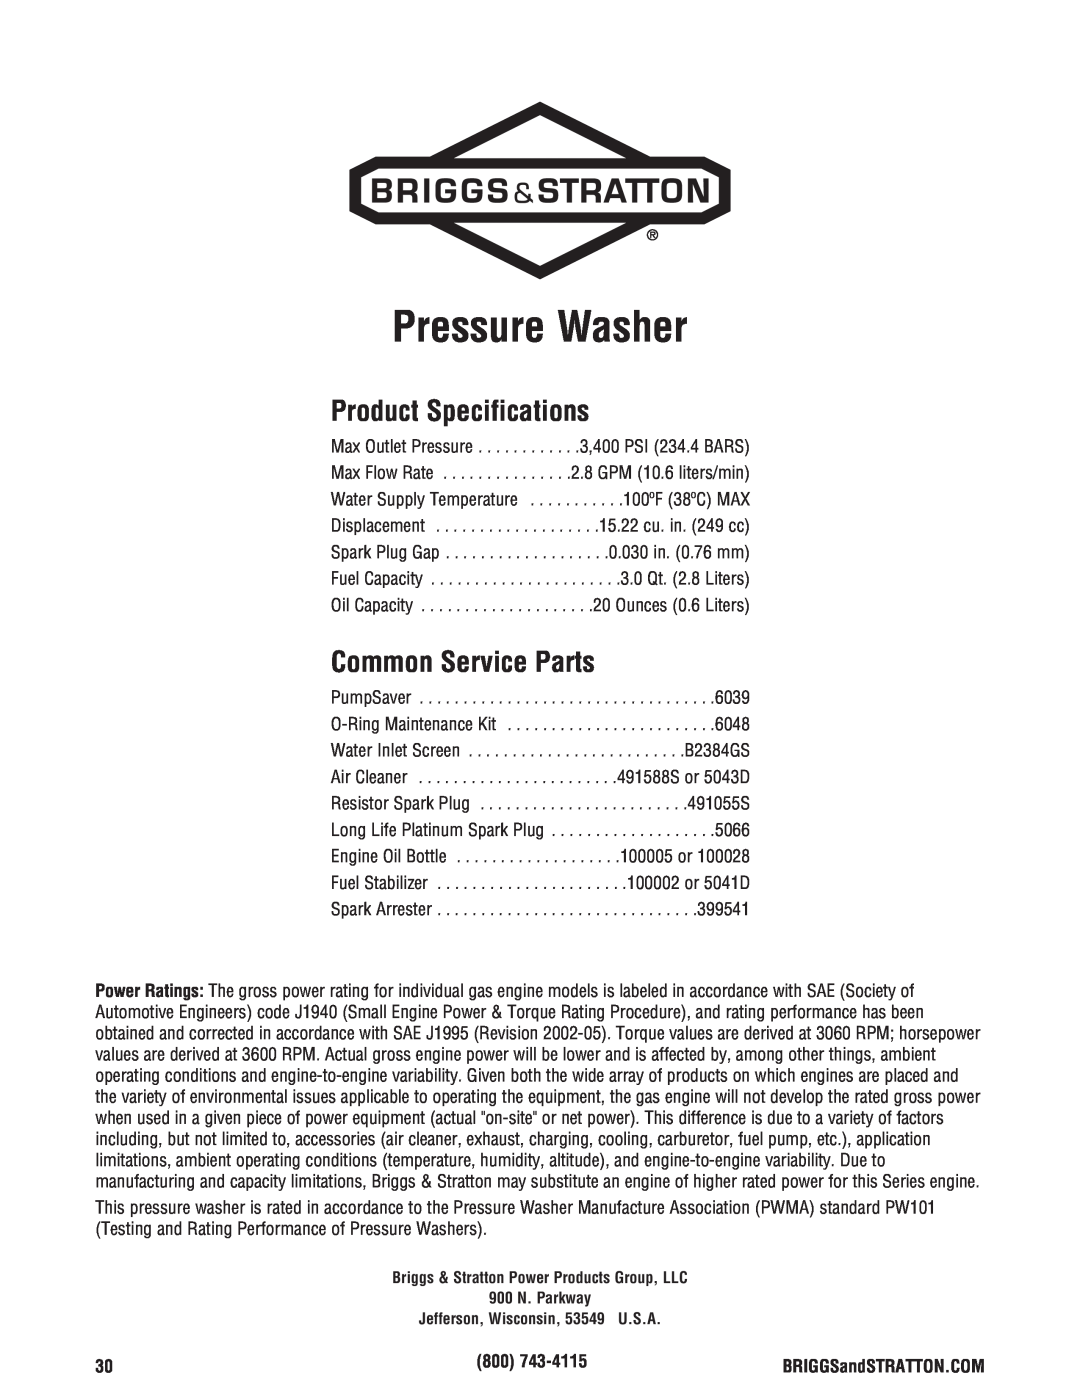 Briggs & Stratton 020364-0 manual Pressure Washer, Product Specifications, Common Service Parts 